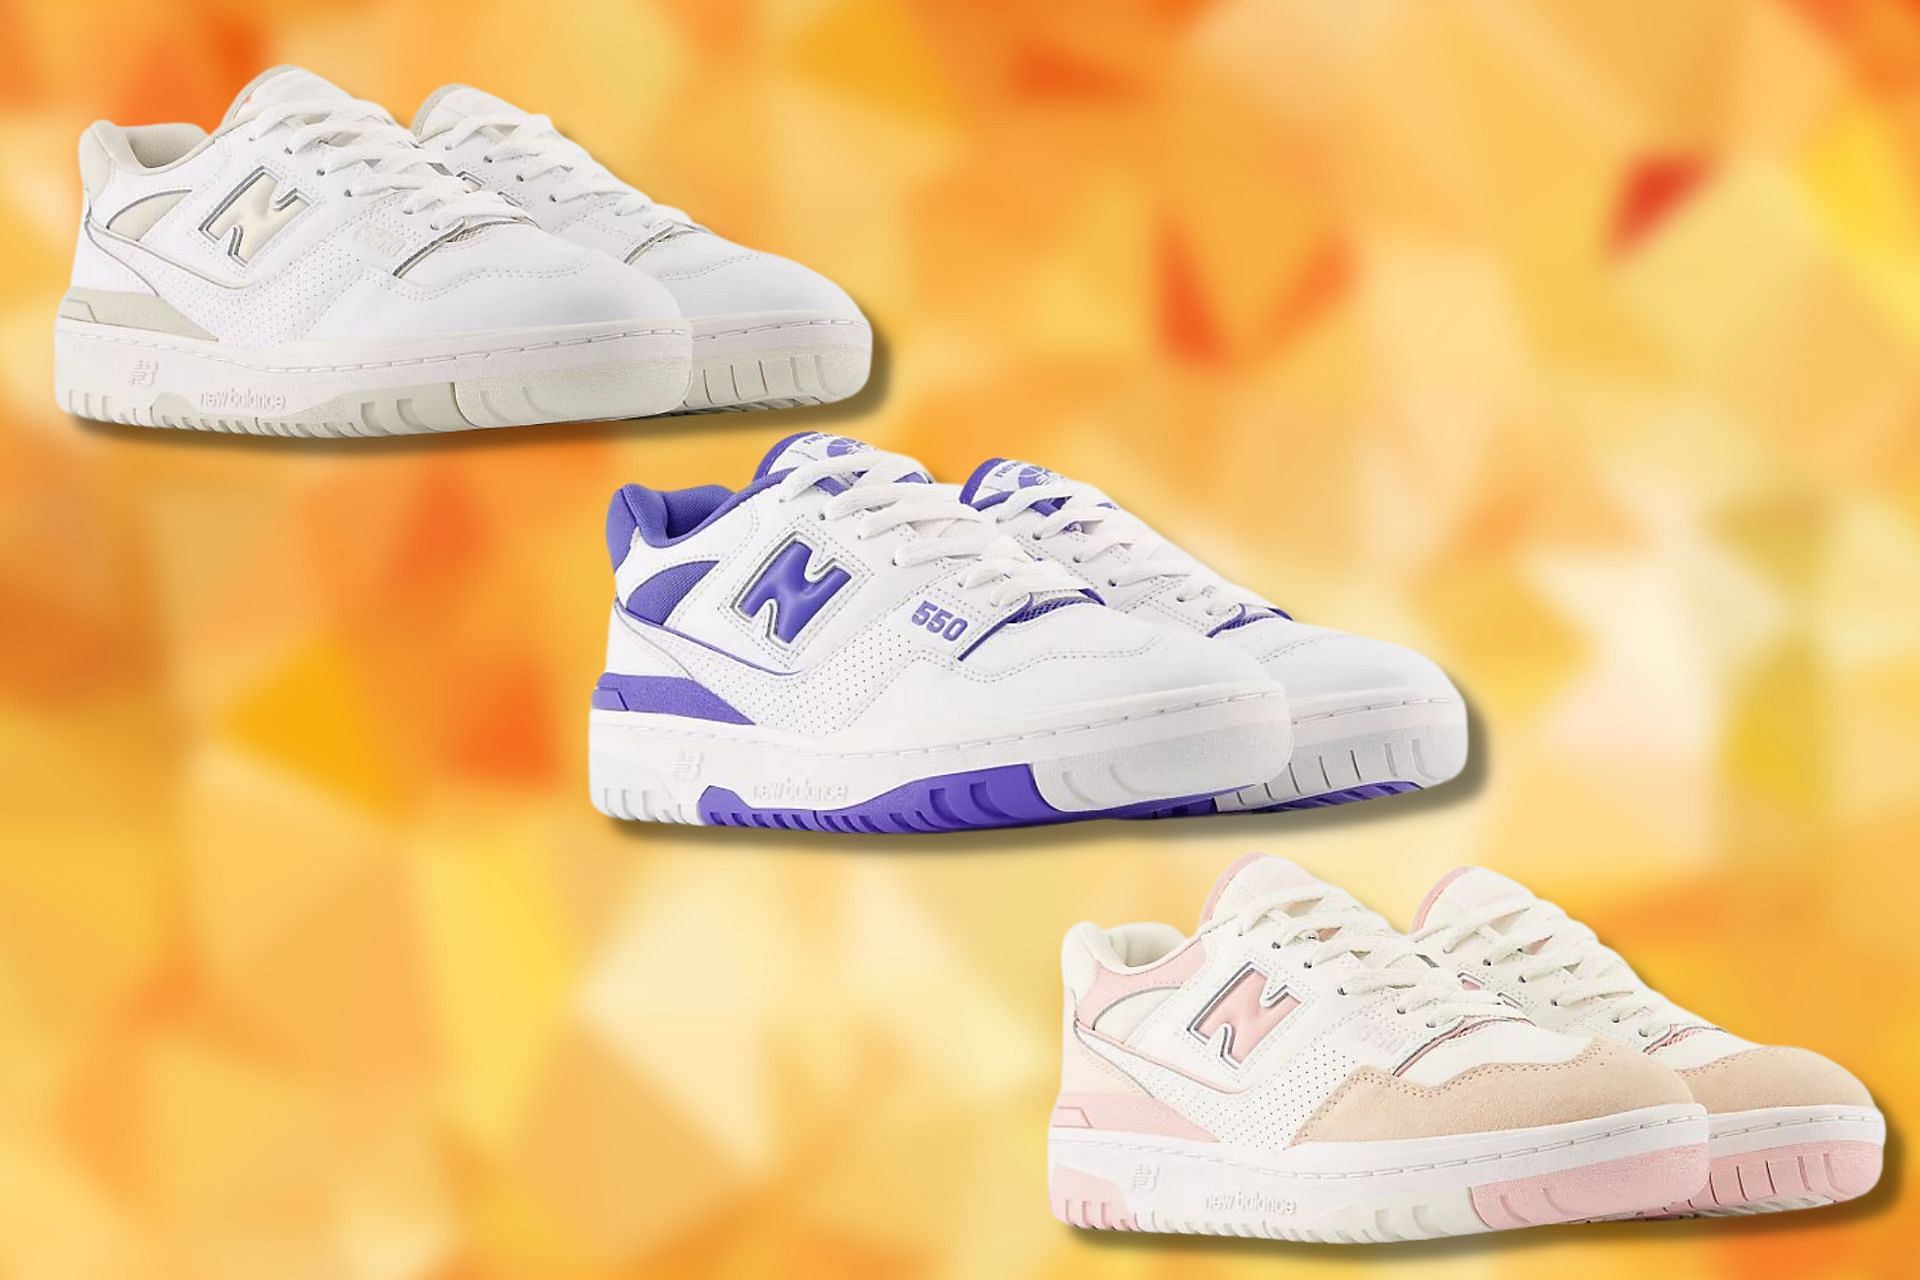 New Balance is all set to release three new colorways of its 550 sneakers (Image via NB)